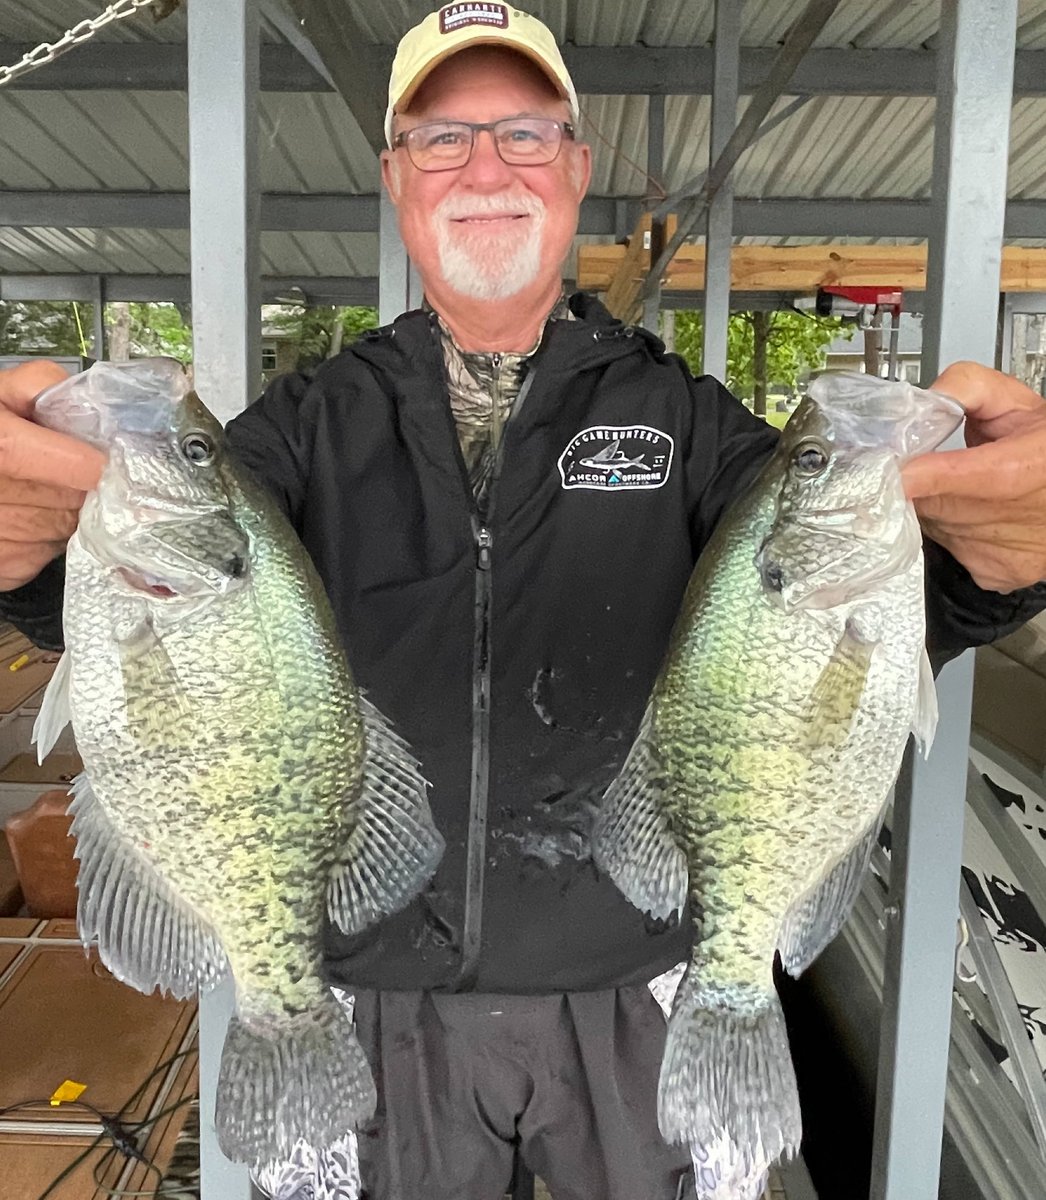 Stripers crushed this Crappie Maxx jig today. A couple HOG post spawn crappie from today. Aggressive bite before the thunderstorms started. Too much fun! ⁦@CrappieNow⁩ #fishing